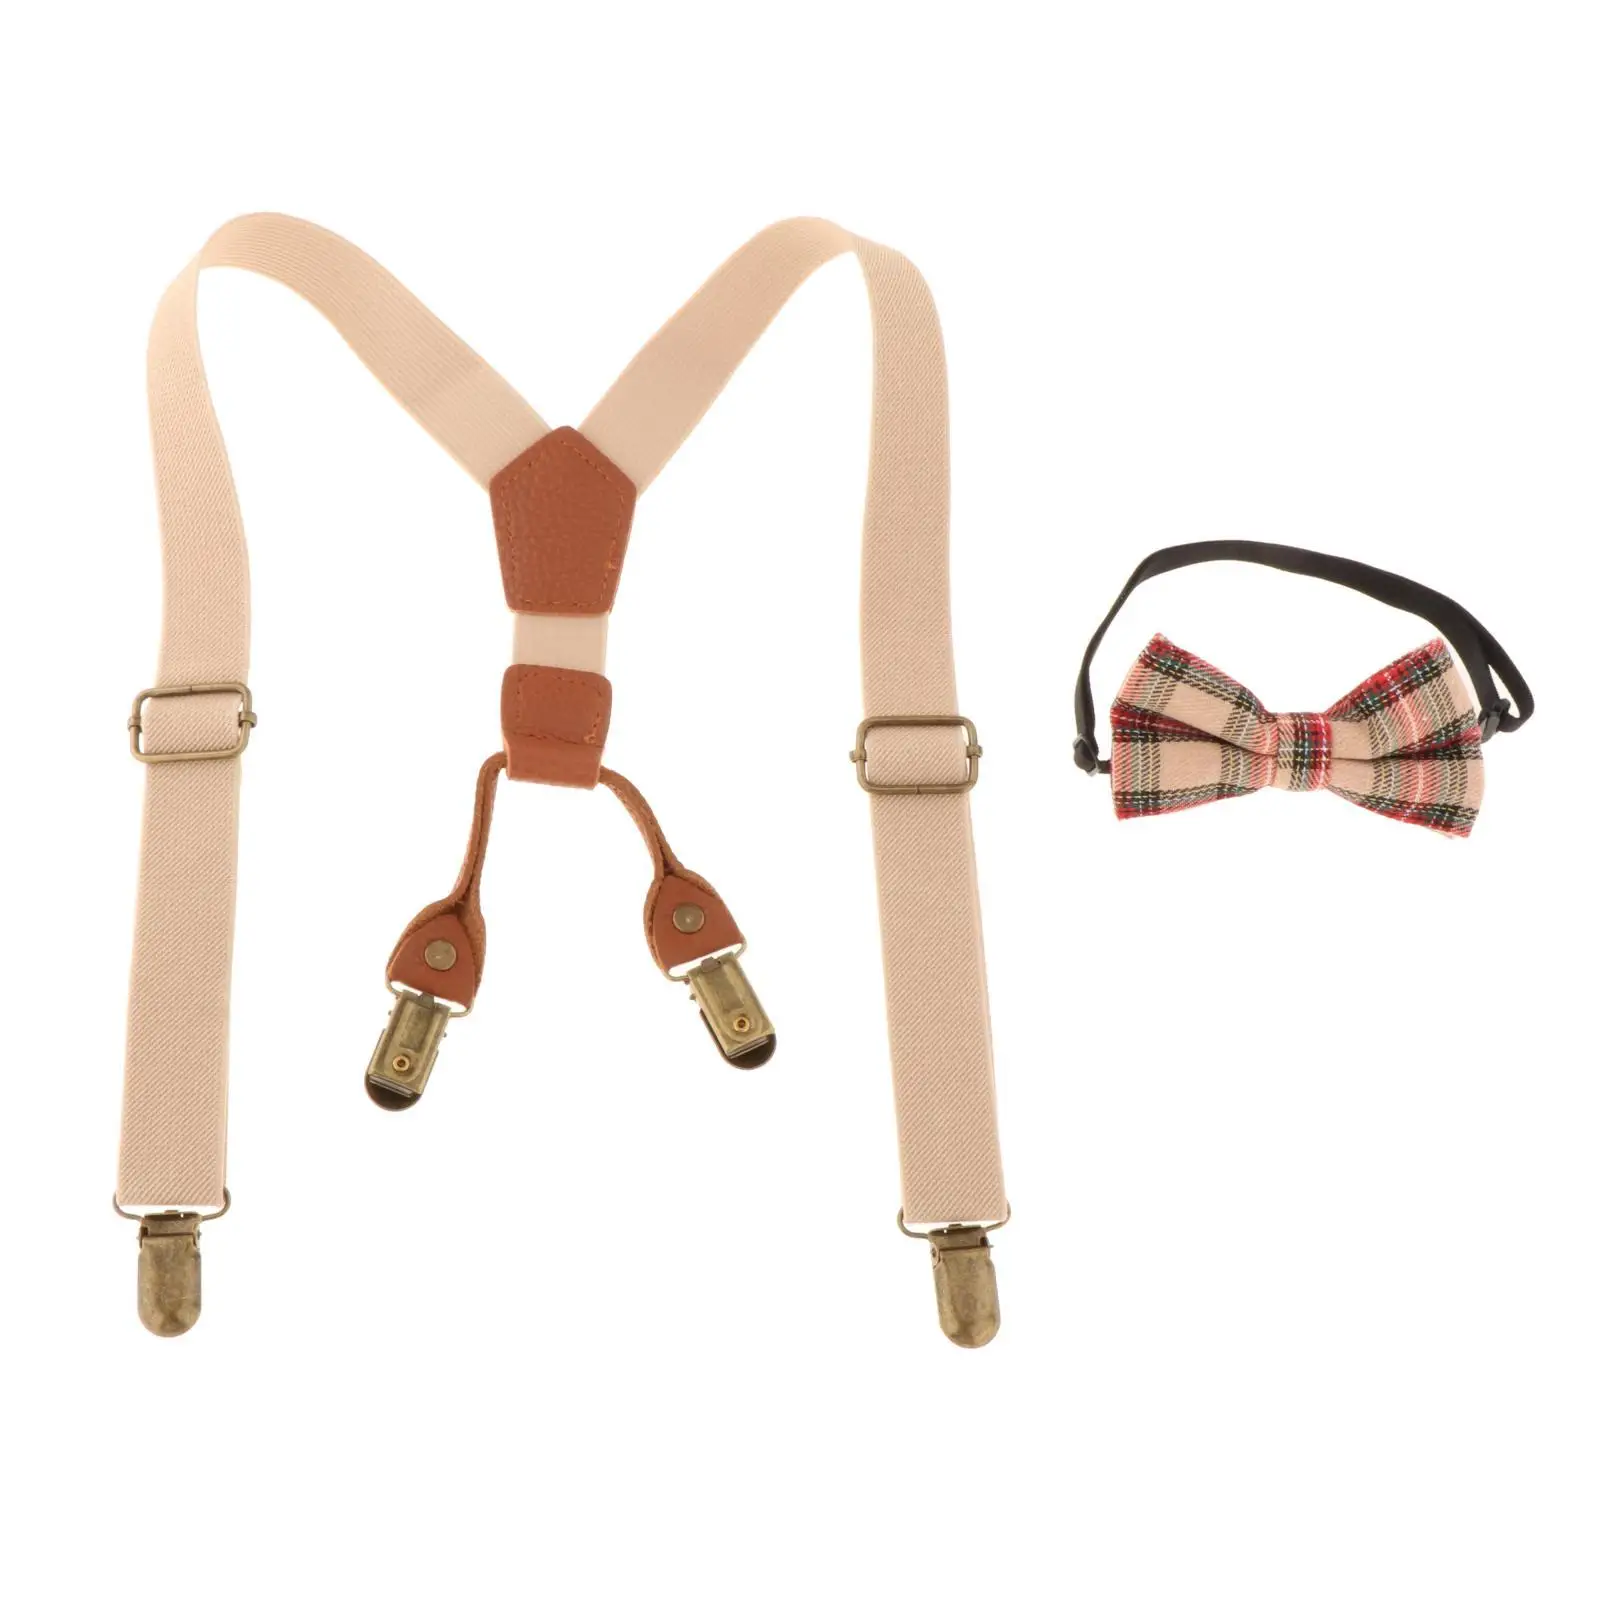 Kids Suspenders and Bow Tie Set 4 Clips Y Back Construction 1 inch Wide Elastic Straps Pants Braces for Boys and Girls Kids